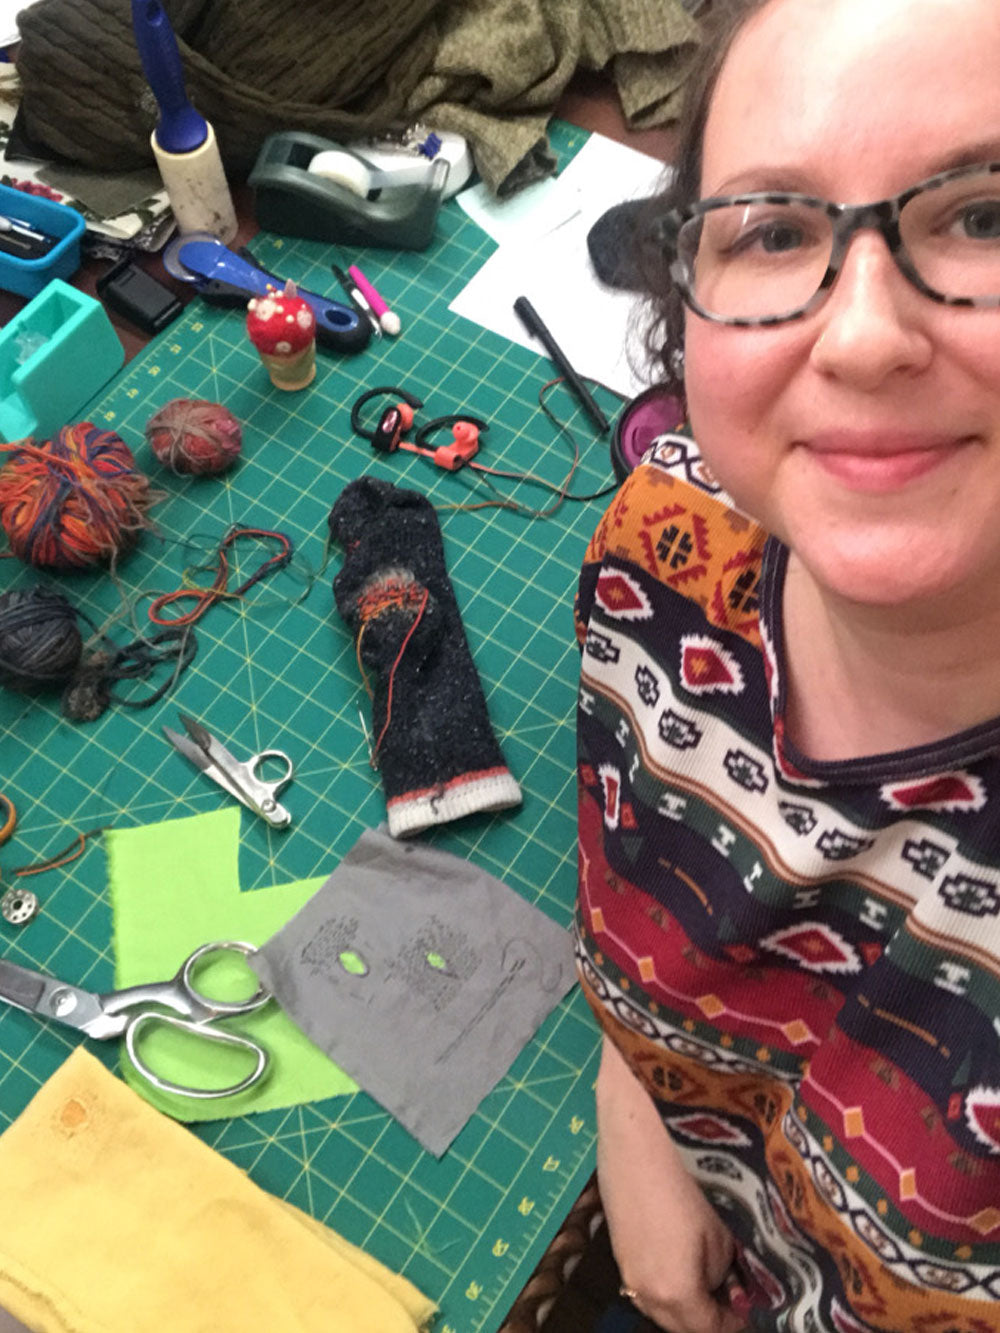 Woman smiles up at camera. Behind her a work table with thread, scissors, sewing accessories, and visible mending examples are on the table. 